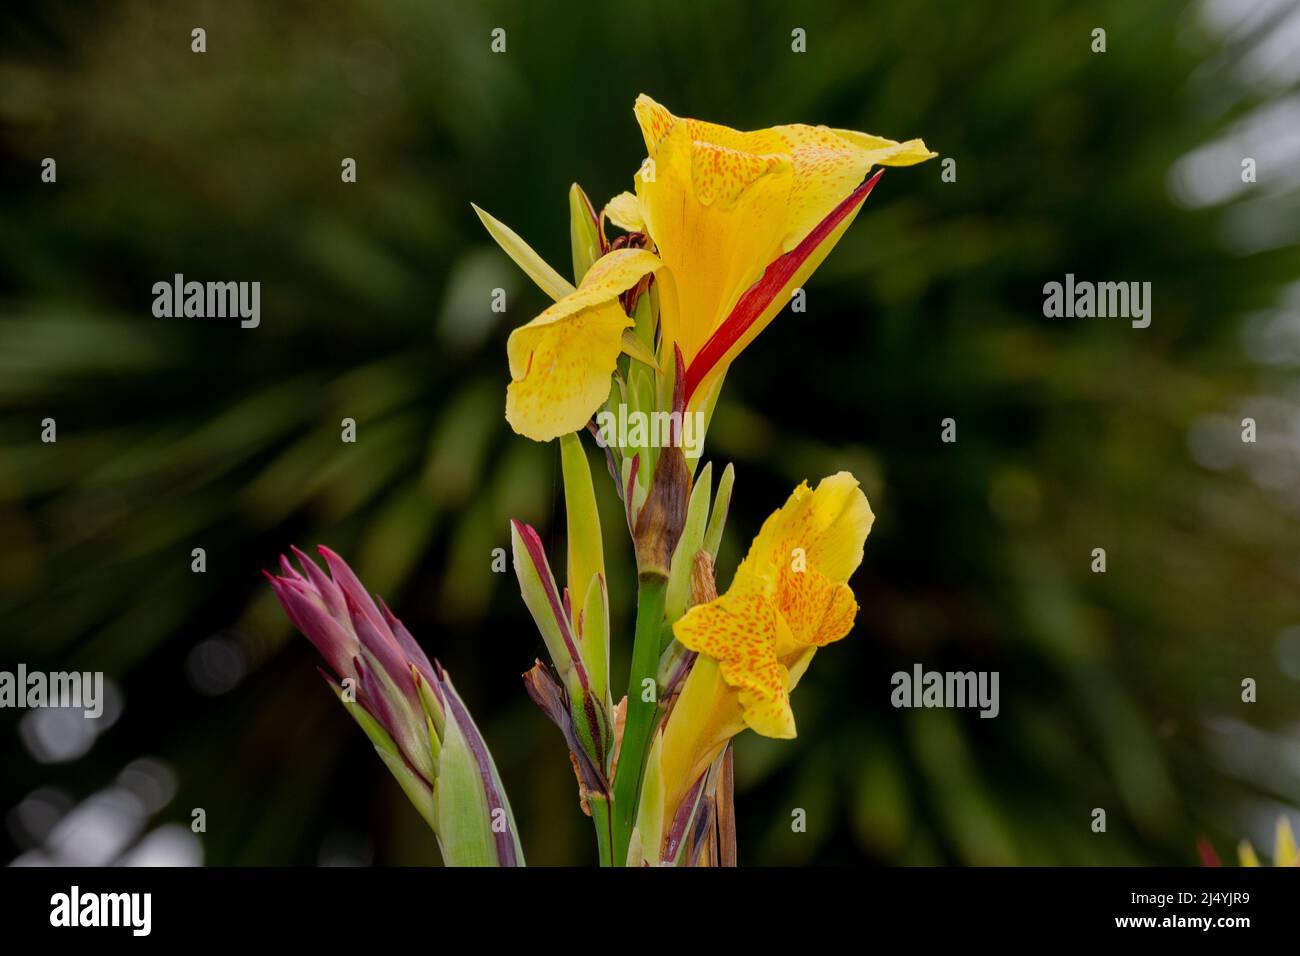 Yellow Gladiolus with red spots (Gladiolus), a genus of perennial cormous flowering plants in the iris family (Iridaceae). Stock Photo